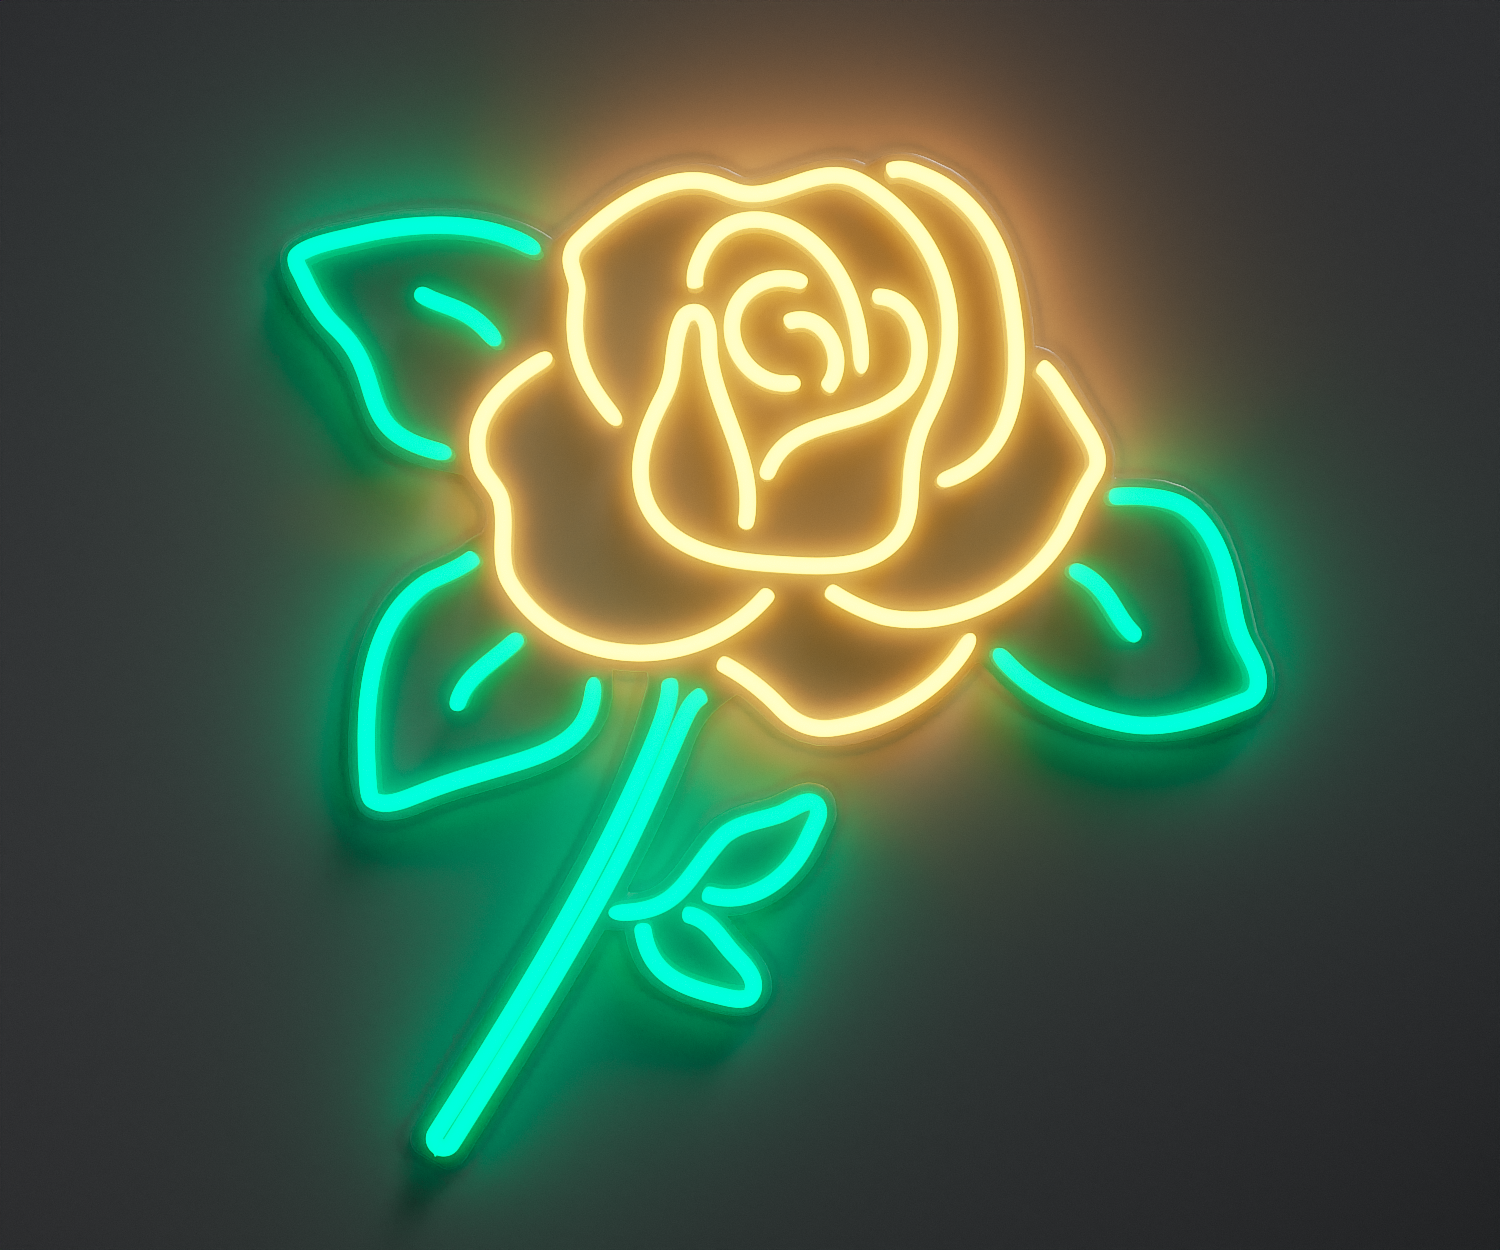 warm white and turquoise rose neon sign